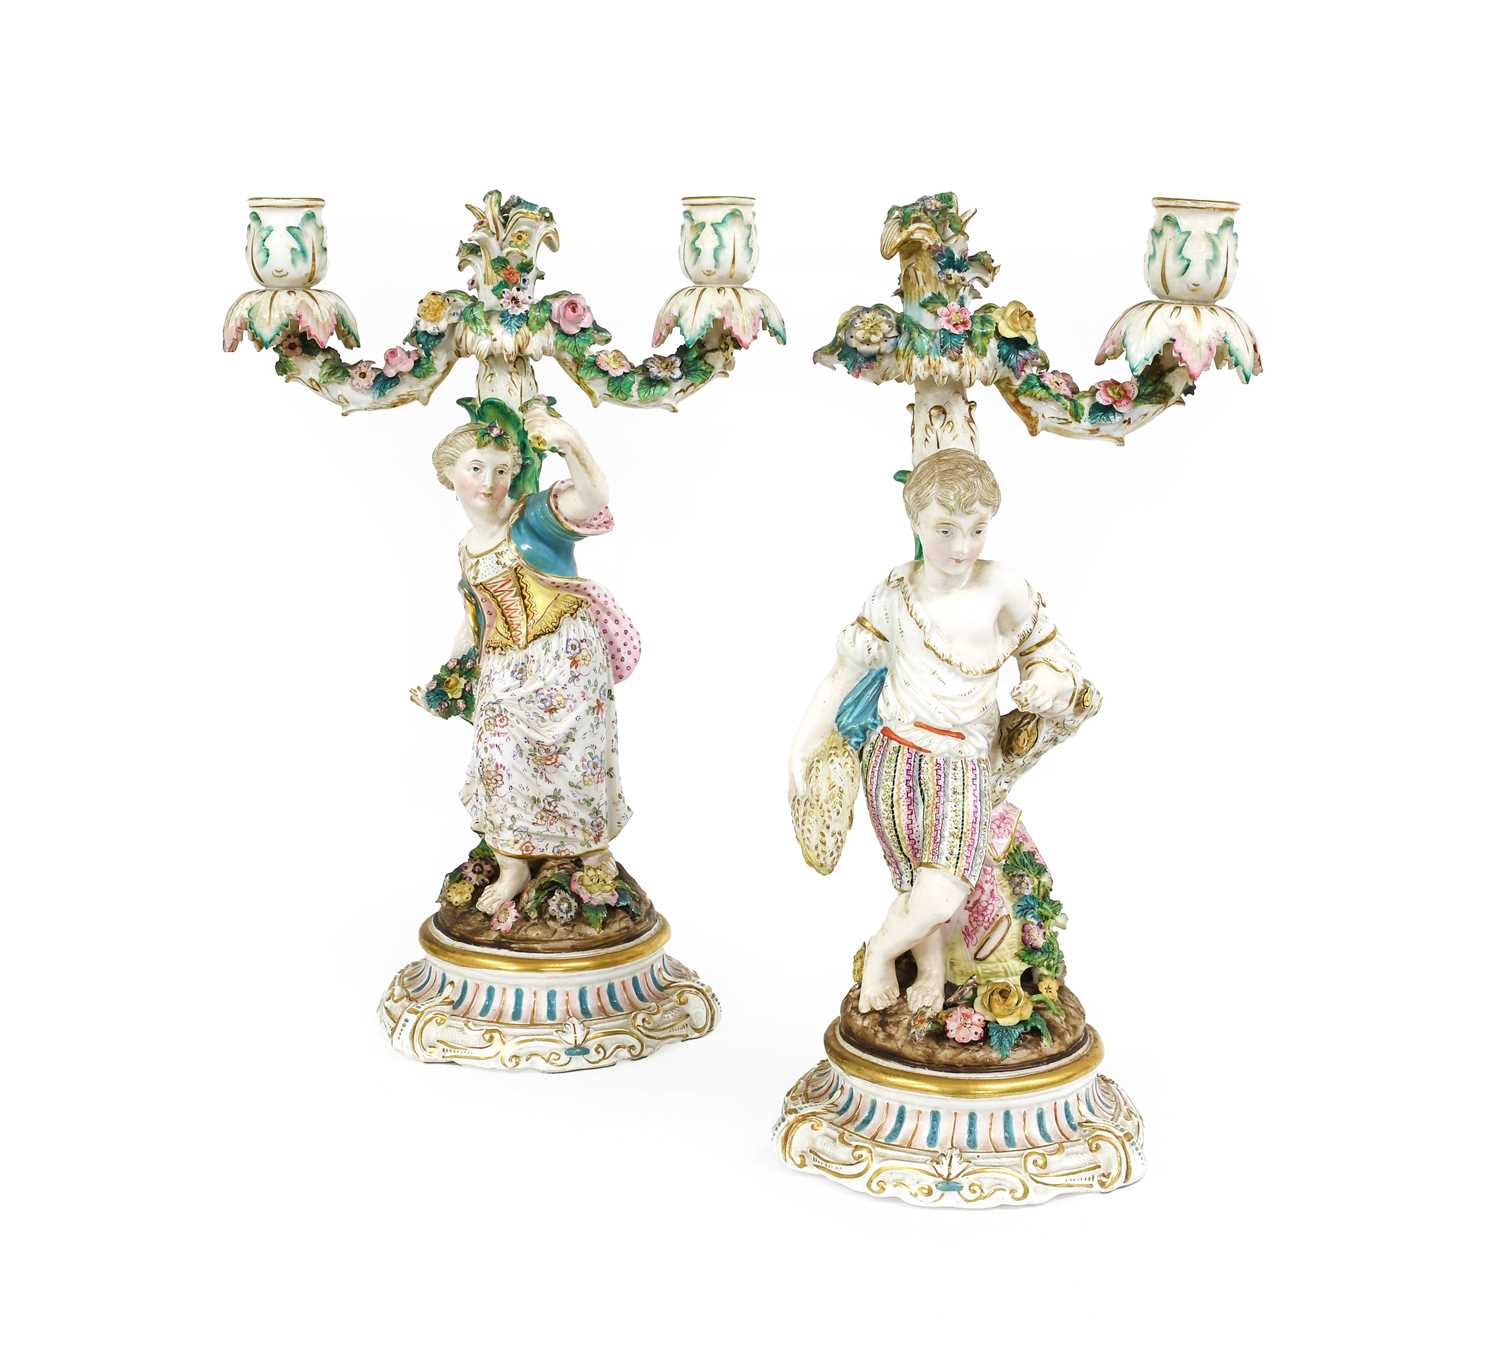 A Pair of Sitzendorf Porcelain Figural Candlesticks, 19th century, a young man harvesting corn - Image 3 of 4